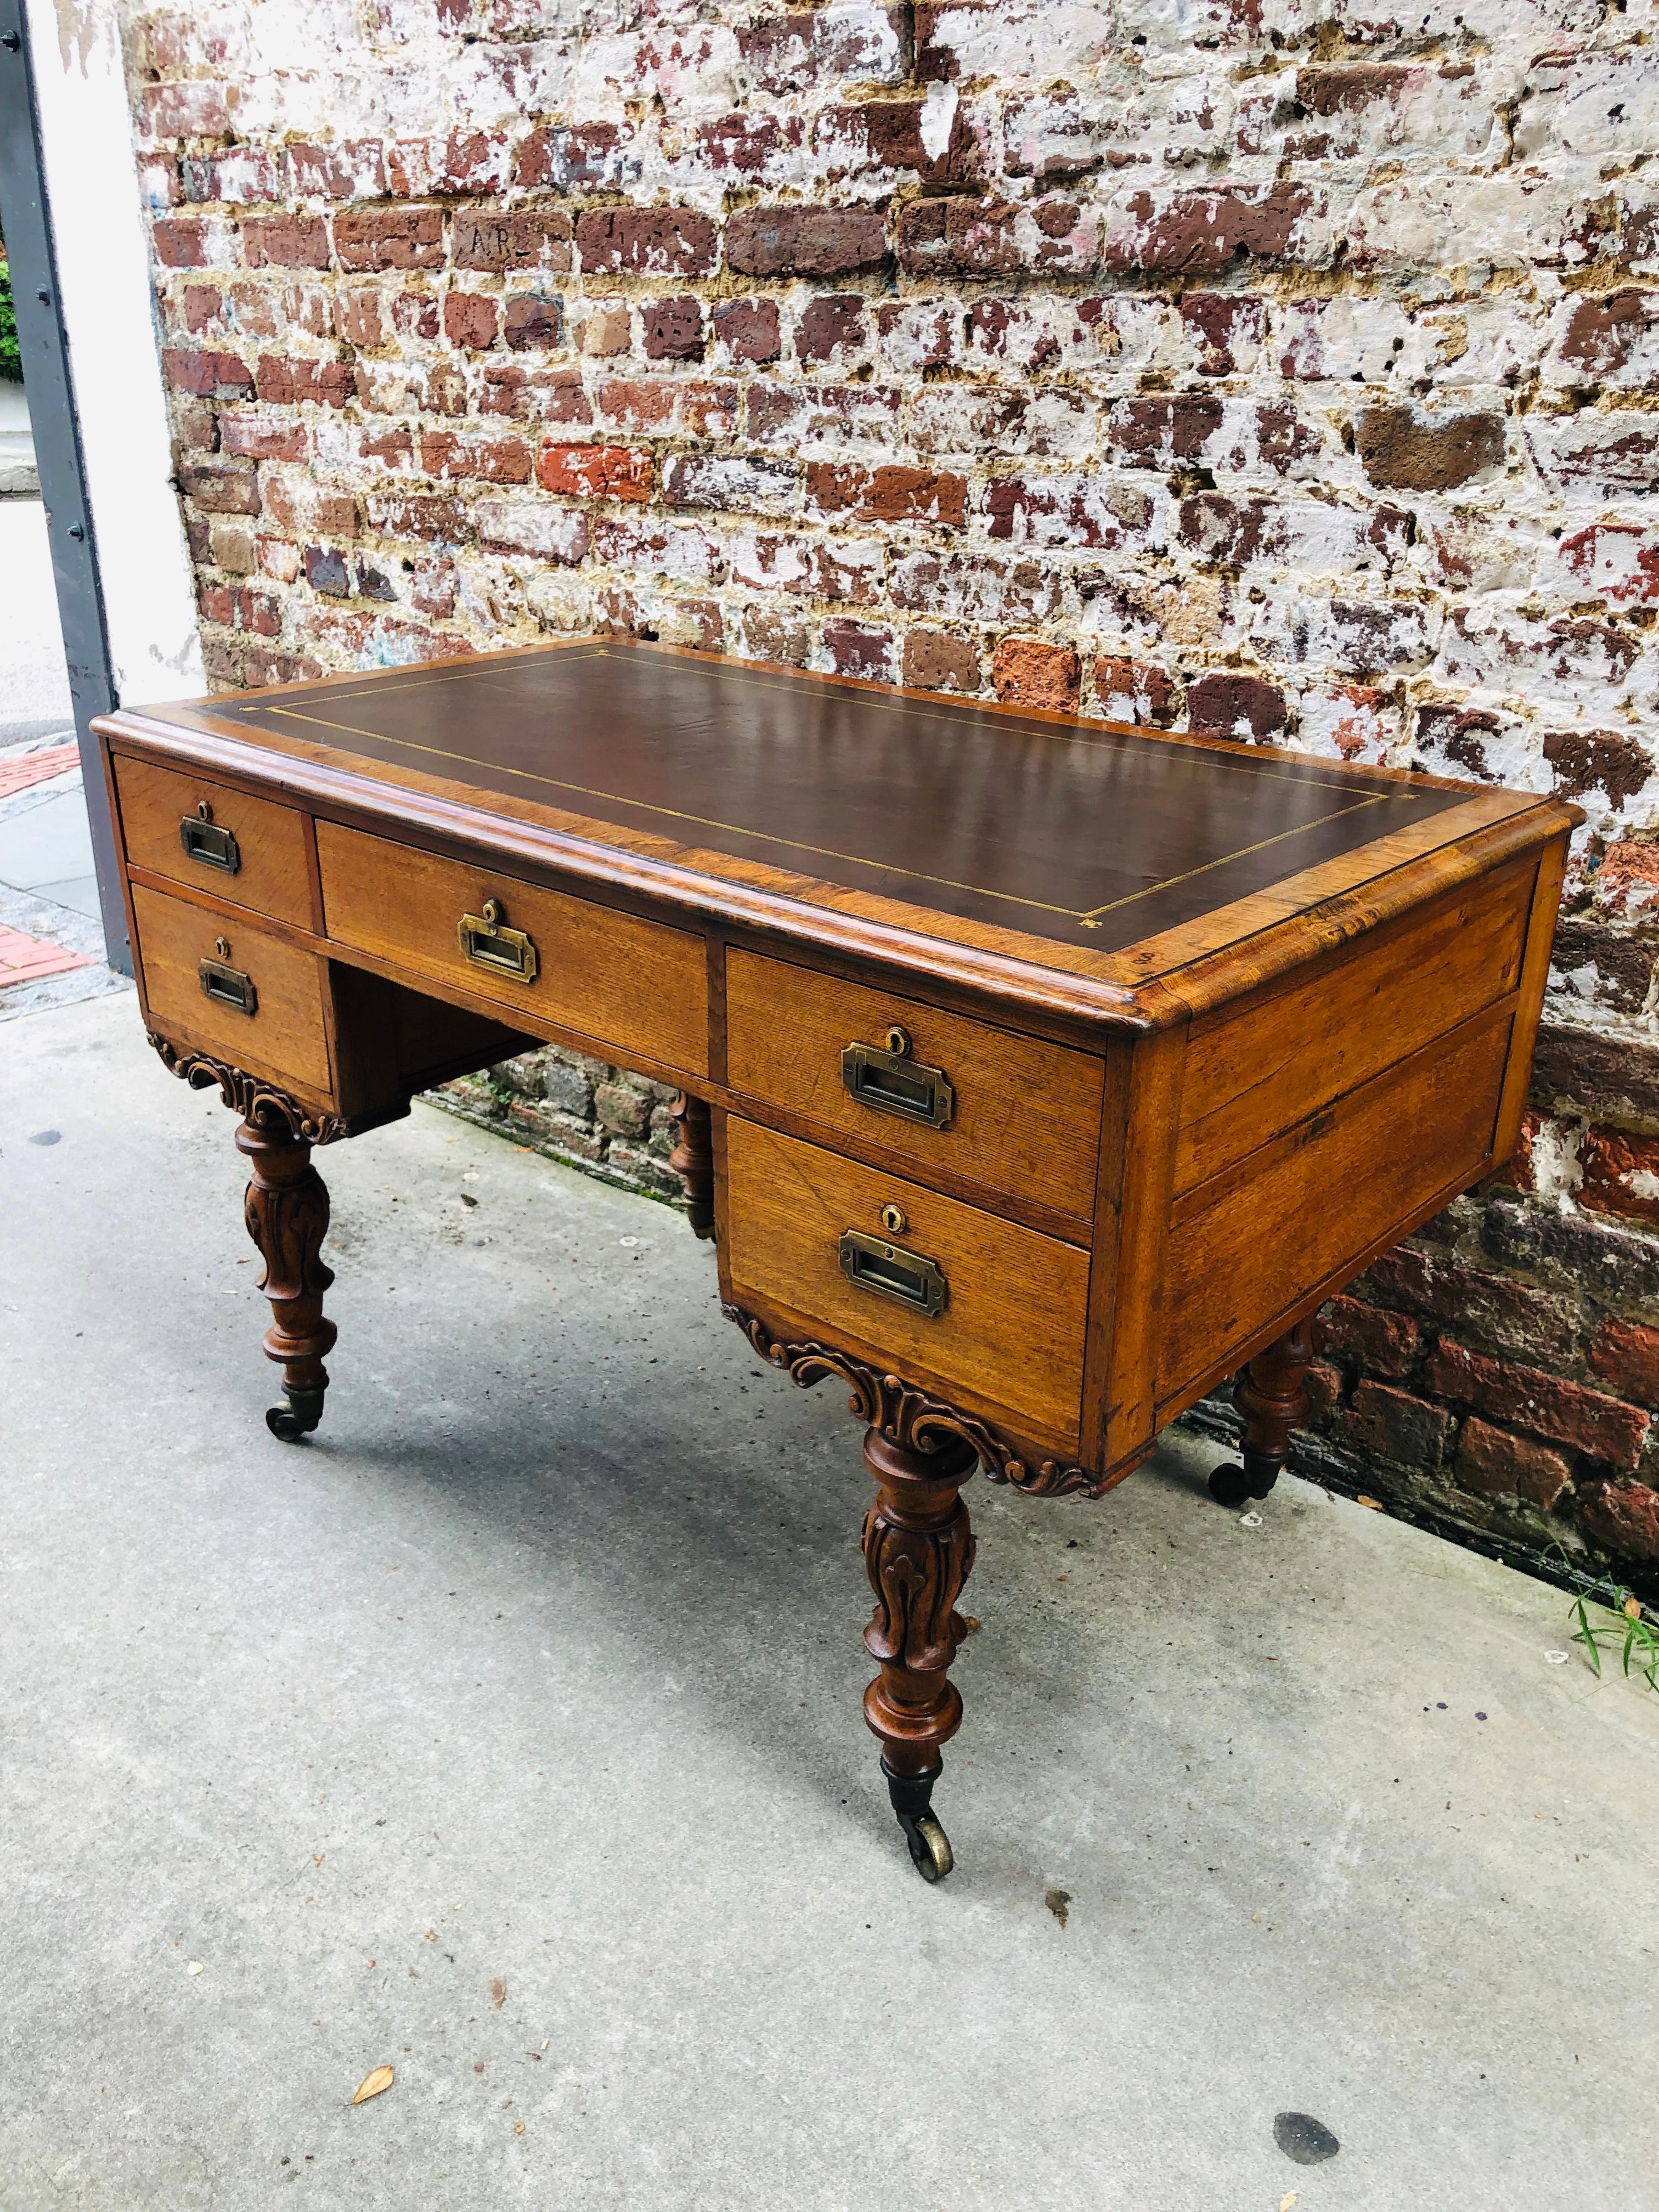 Irish Campaign desk with removable legs late 19th century with hand tooled leather top. Elaborately carved legs and base. FINISHED back.